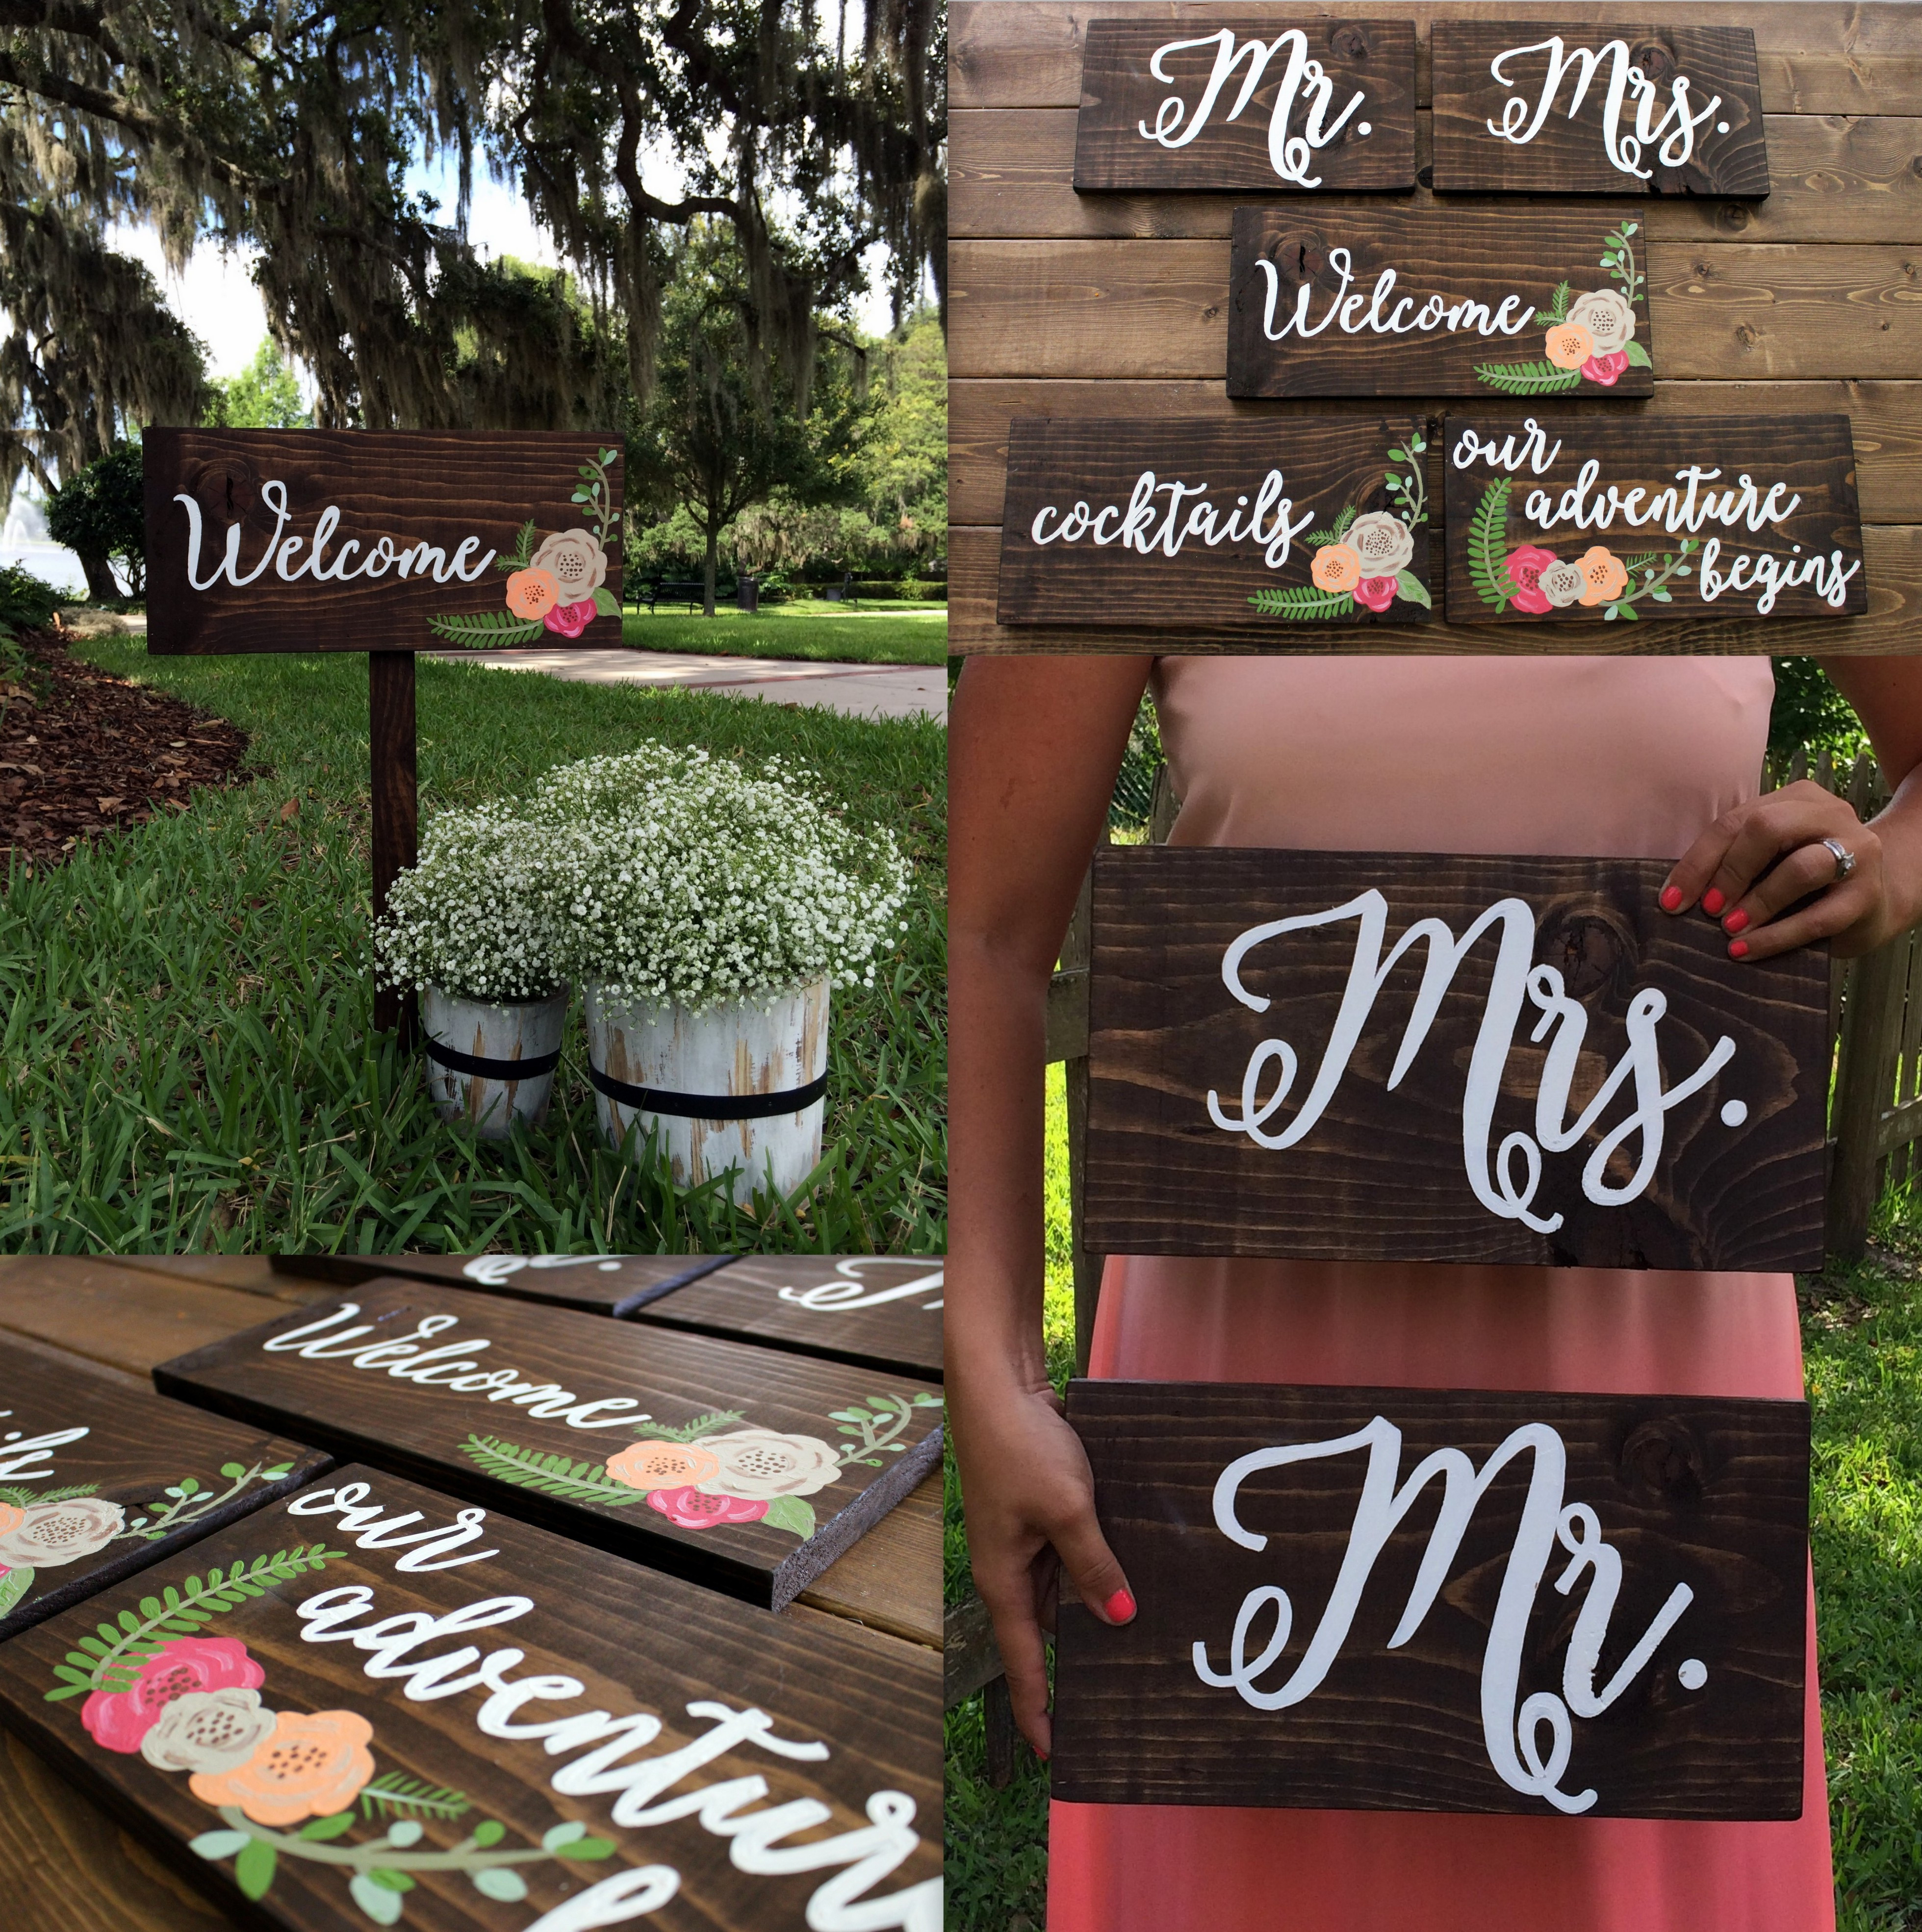 DIY Wedding Signs Templates
 DIY Wedding Calligraphy Signs Within the Grove